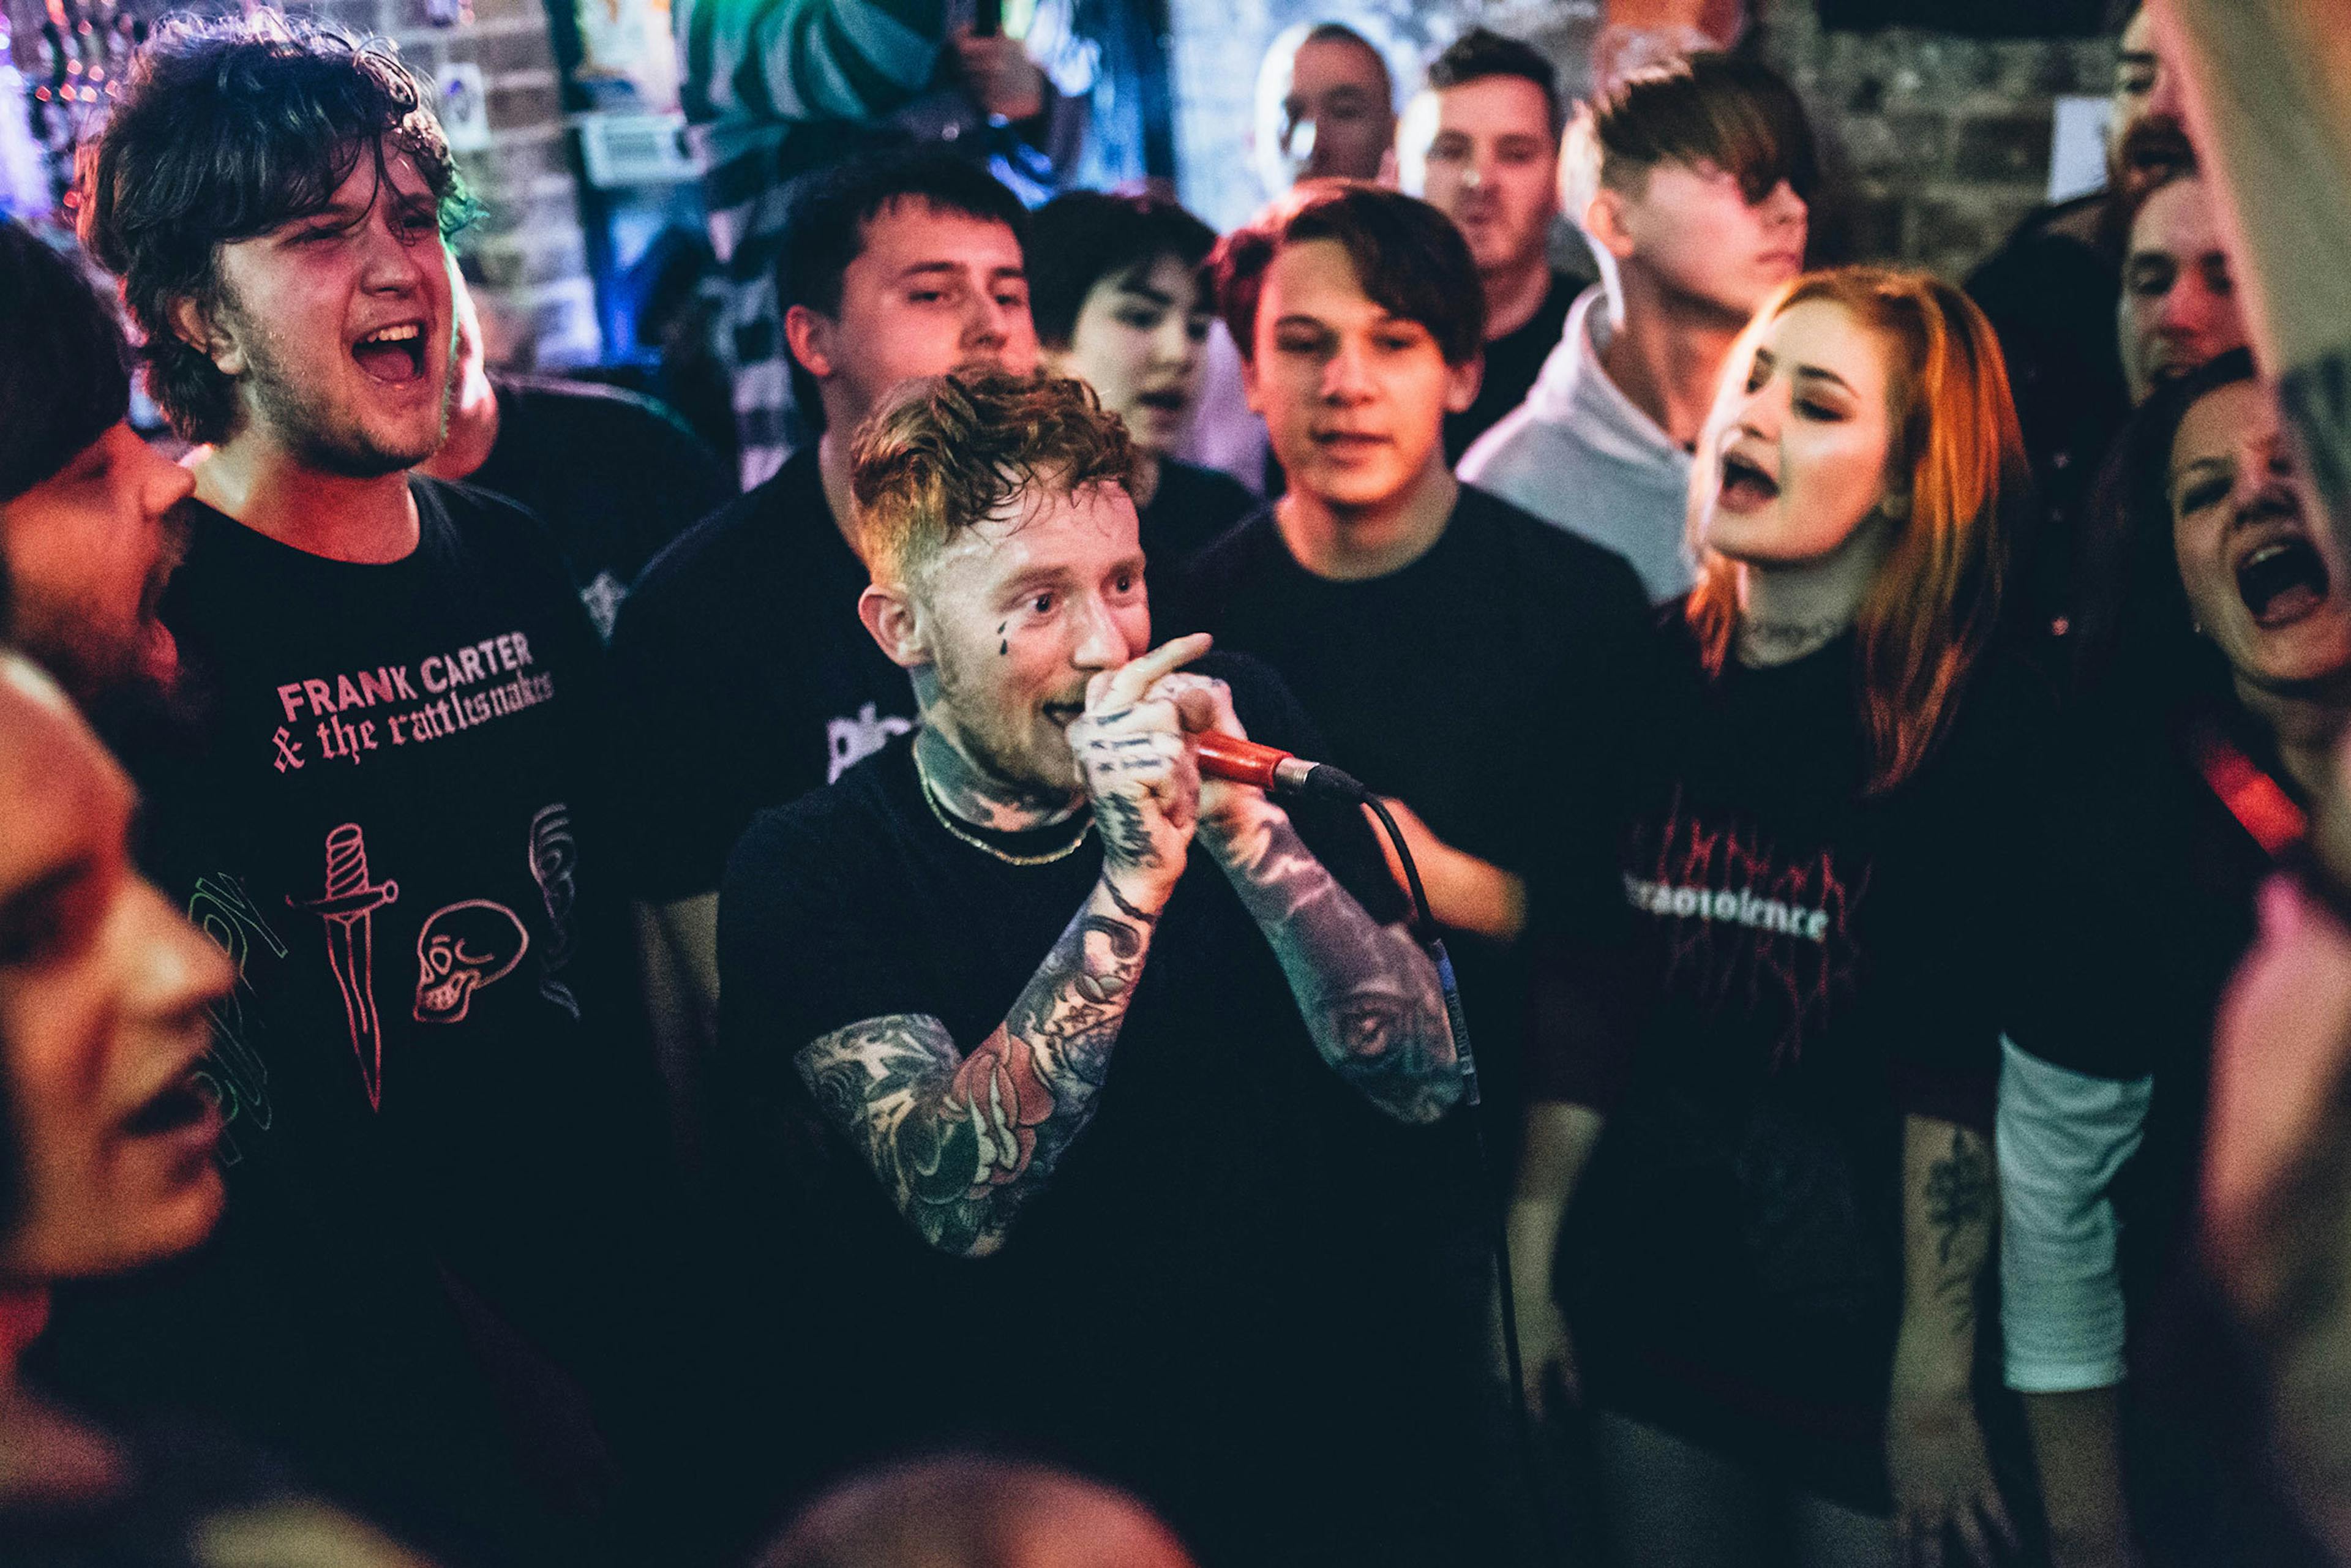 In Pictures: Frank Carter & The Rattlesnakes' Smallest Show Of The Year